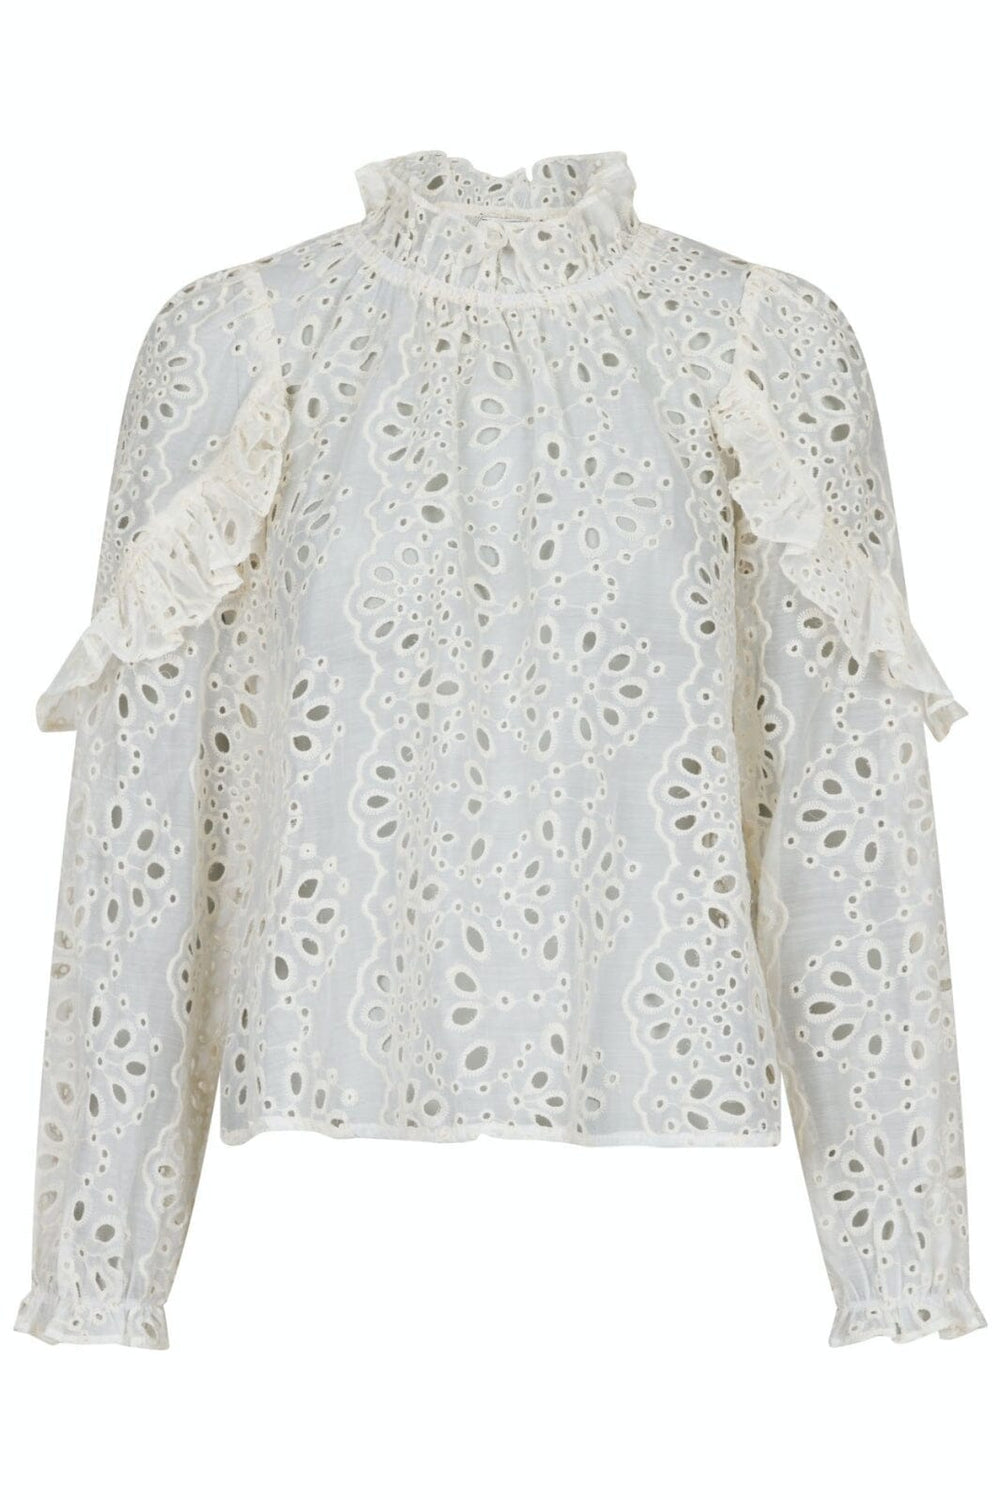 Neo Noir - Nadira Embroidery Blouse - Ivory Bluser 